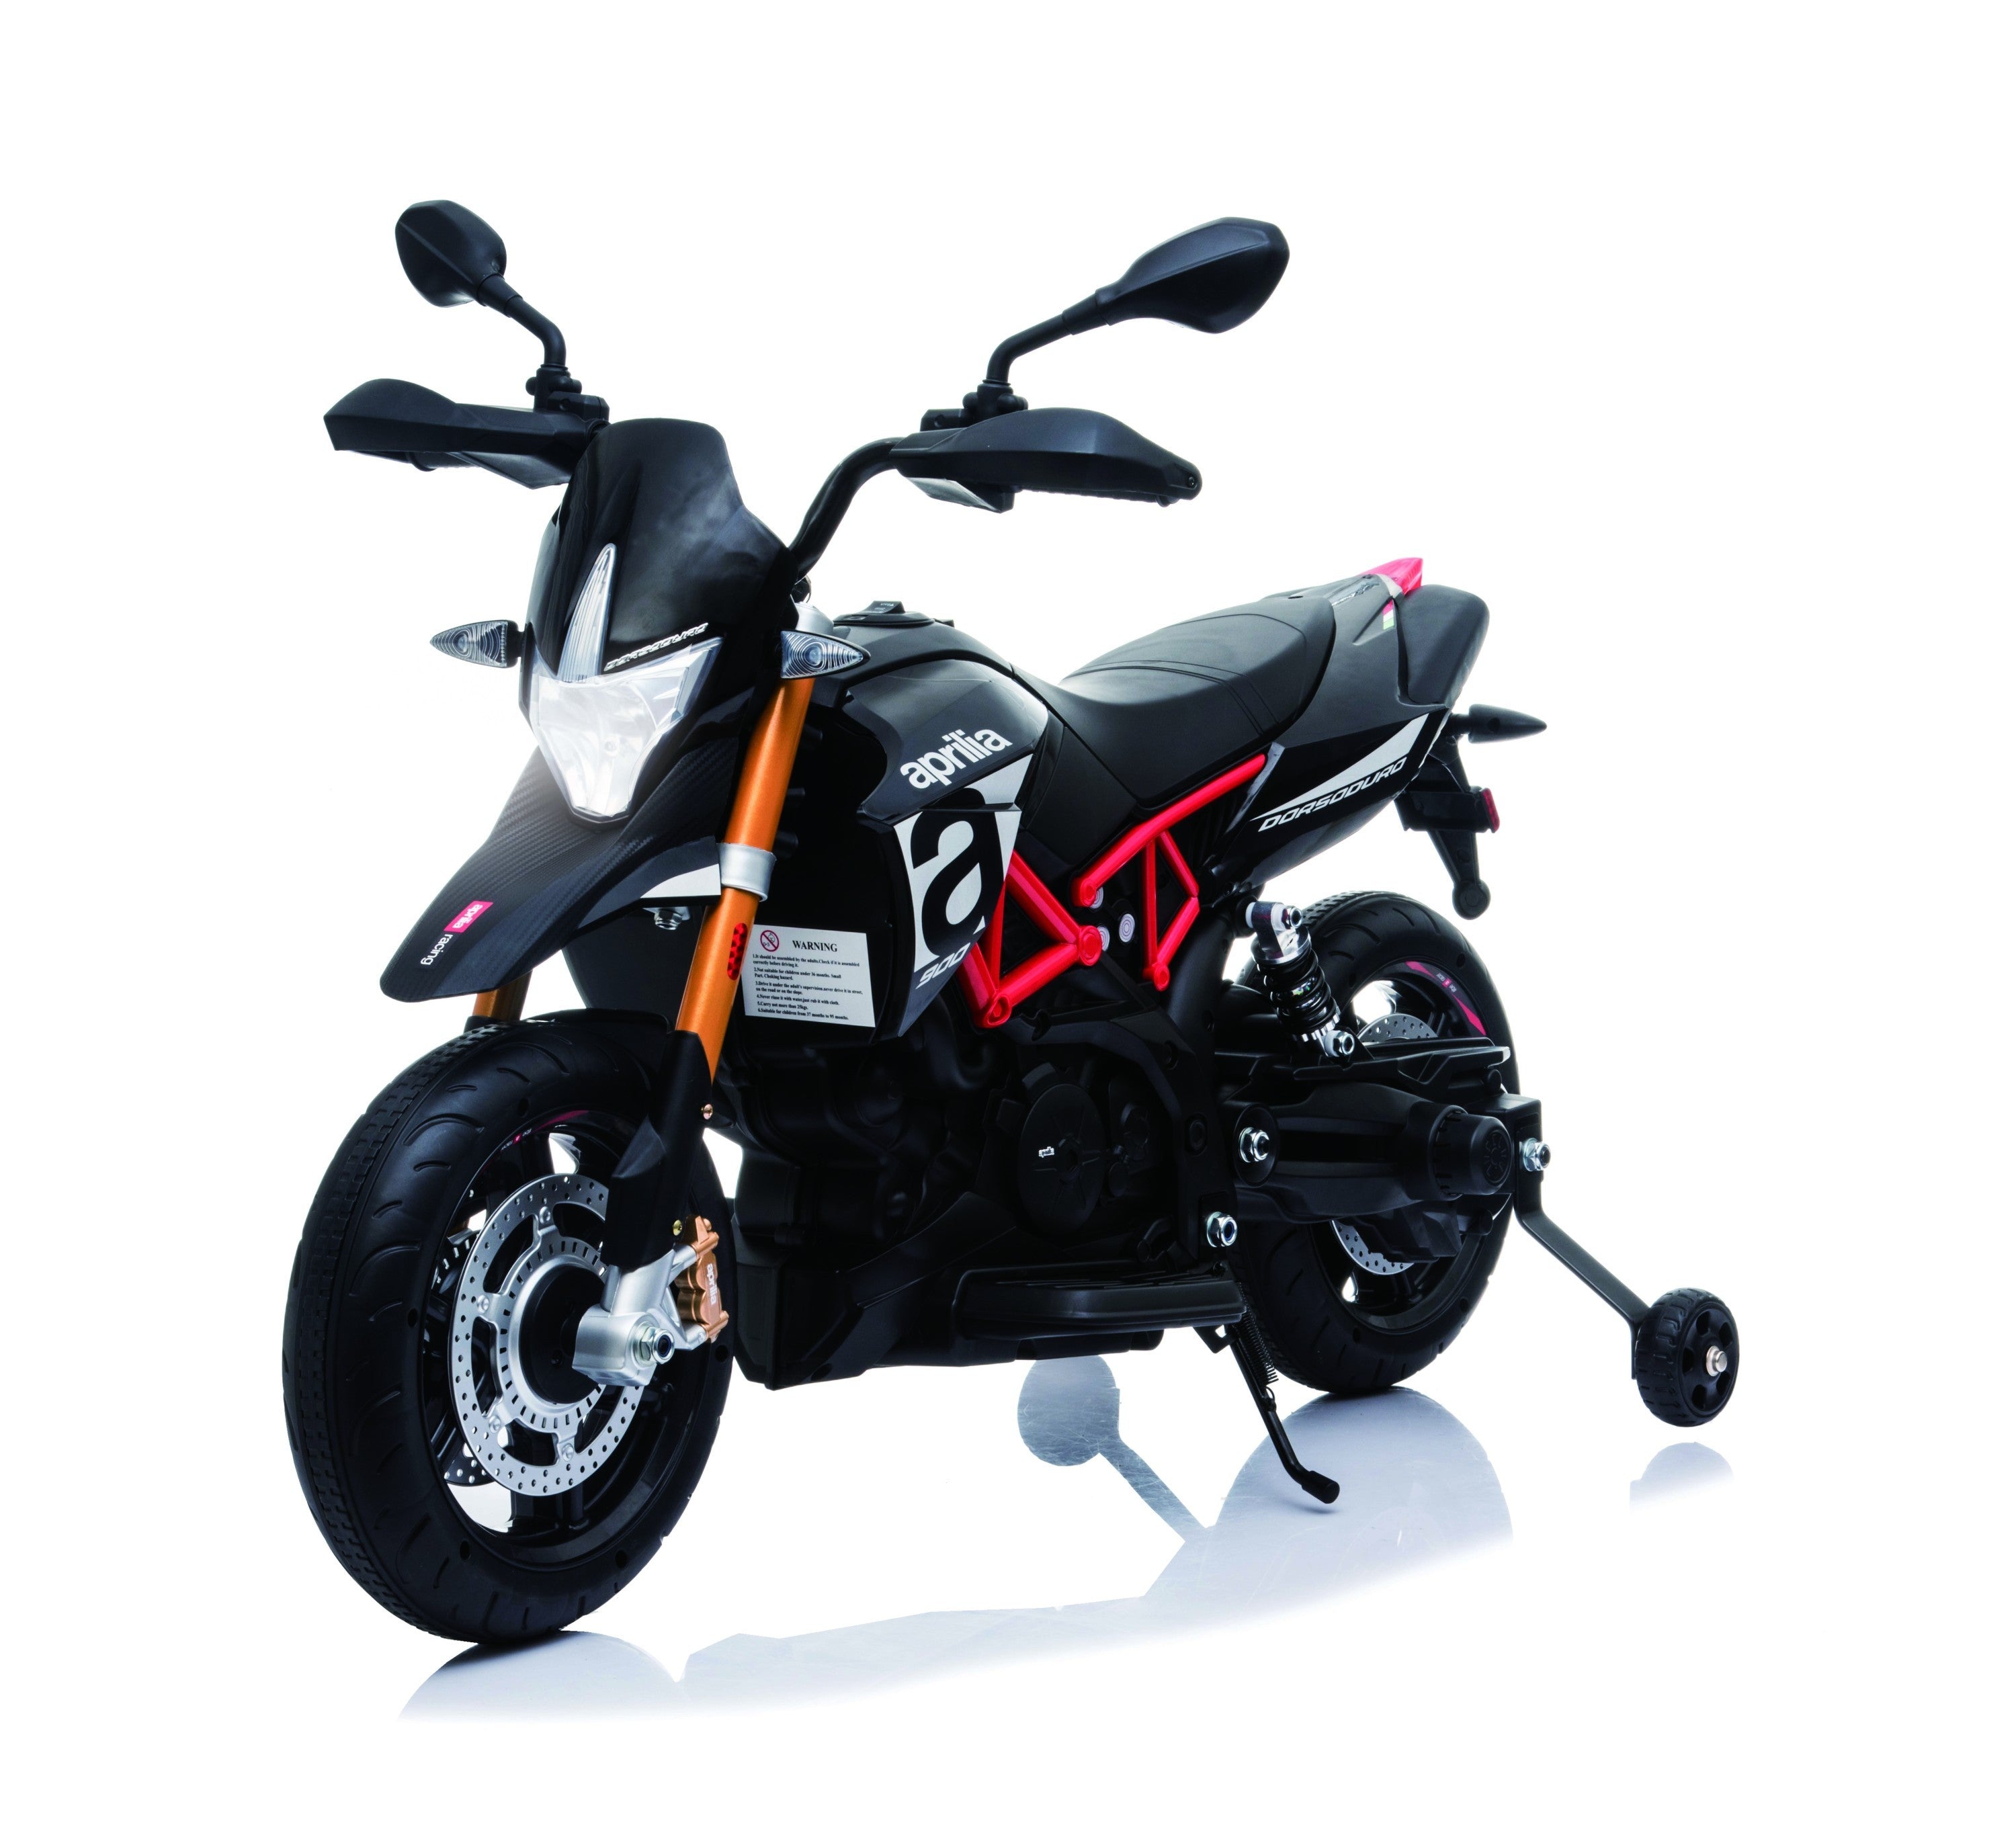 🆓🚛 Licensed Aprilia Electric Motorcycle, 12V Kids Motorcycle, Ride On Toy W/Training Wheels, Spring Suspension, Led Lights, Sounds & Music, Mp3, Battery Powered Dirt Bike for Boys & Girls, Black